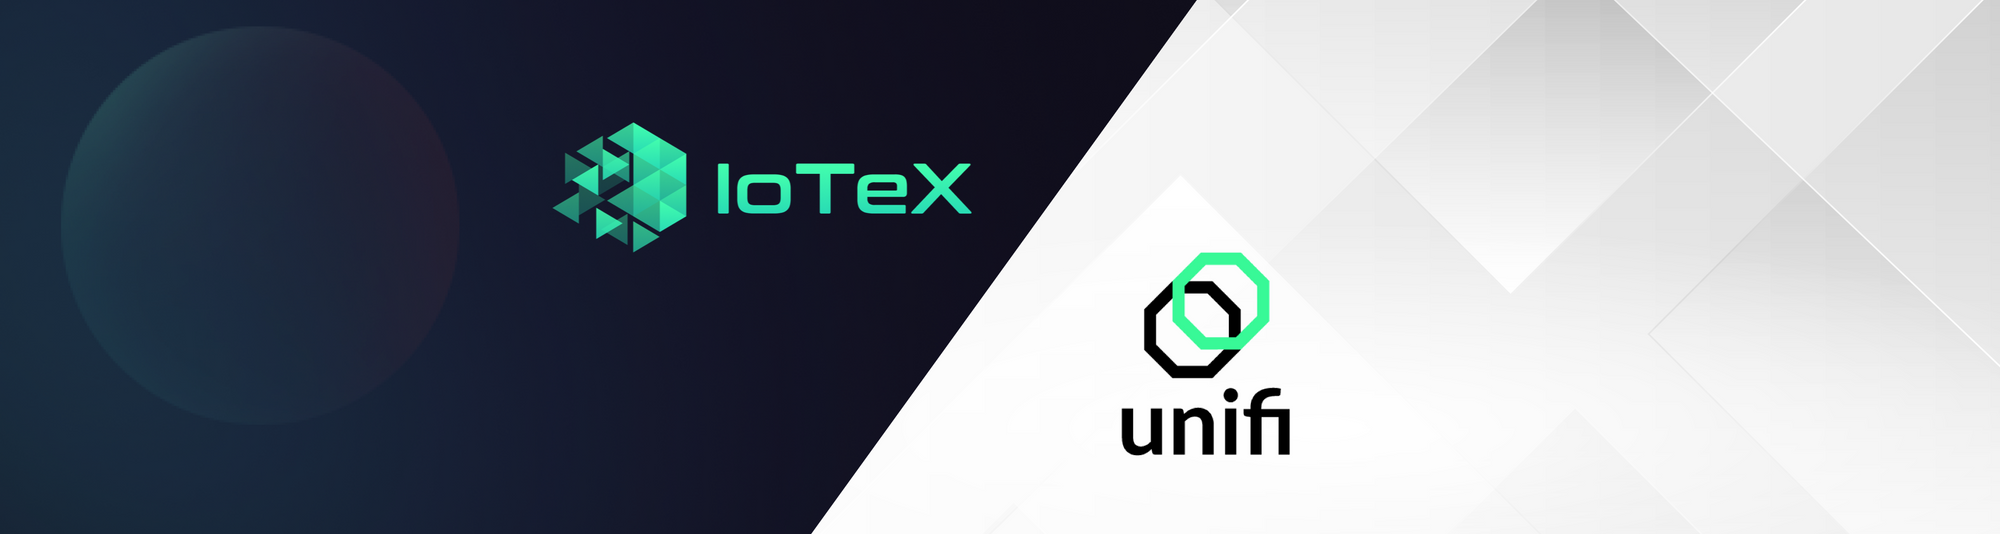 IoTeX x Unifi Protocol - uTrade v2 Launches on August 11